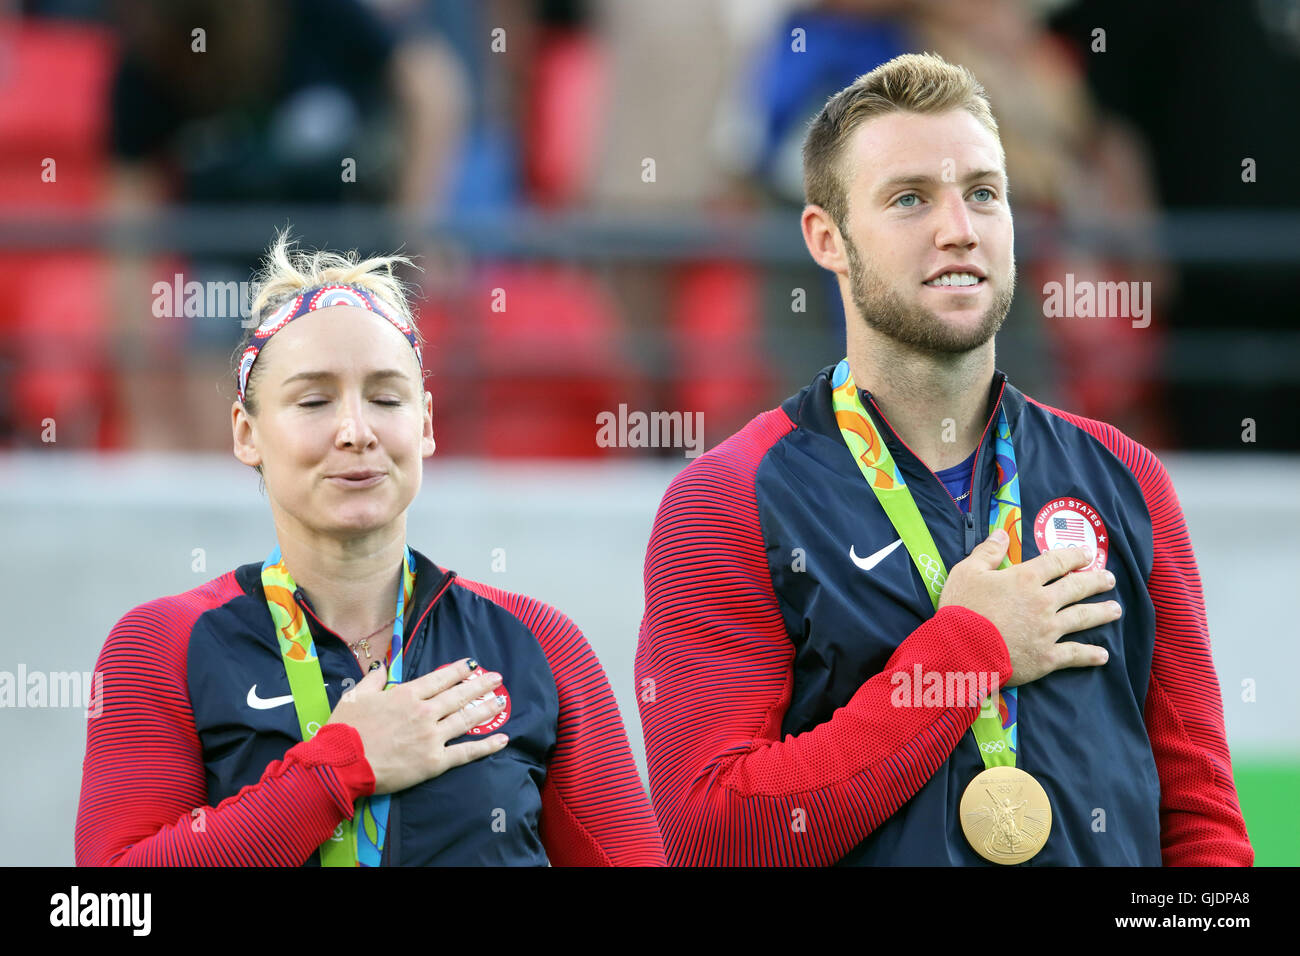 Rio de Janeiro, Brazil 14th Aug, 2016 Bethanie Mattek-Sands and Jack Sock during the national anthem as realisation dawned at winning the Gold Medal in the Olympics Mixed Doubles Tennis Final in Rio de Janeiro. They beat Venus Williams and Rajeev Ram. Stock Photo